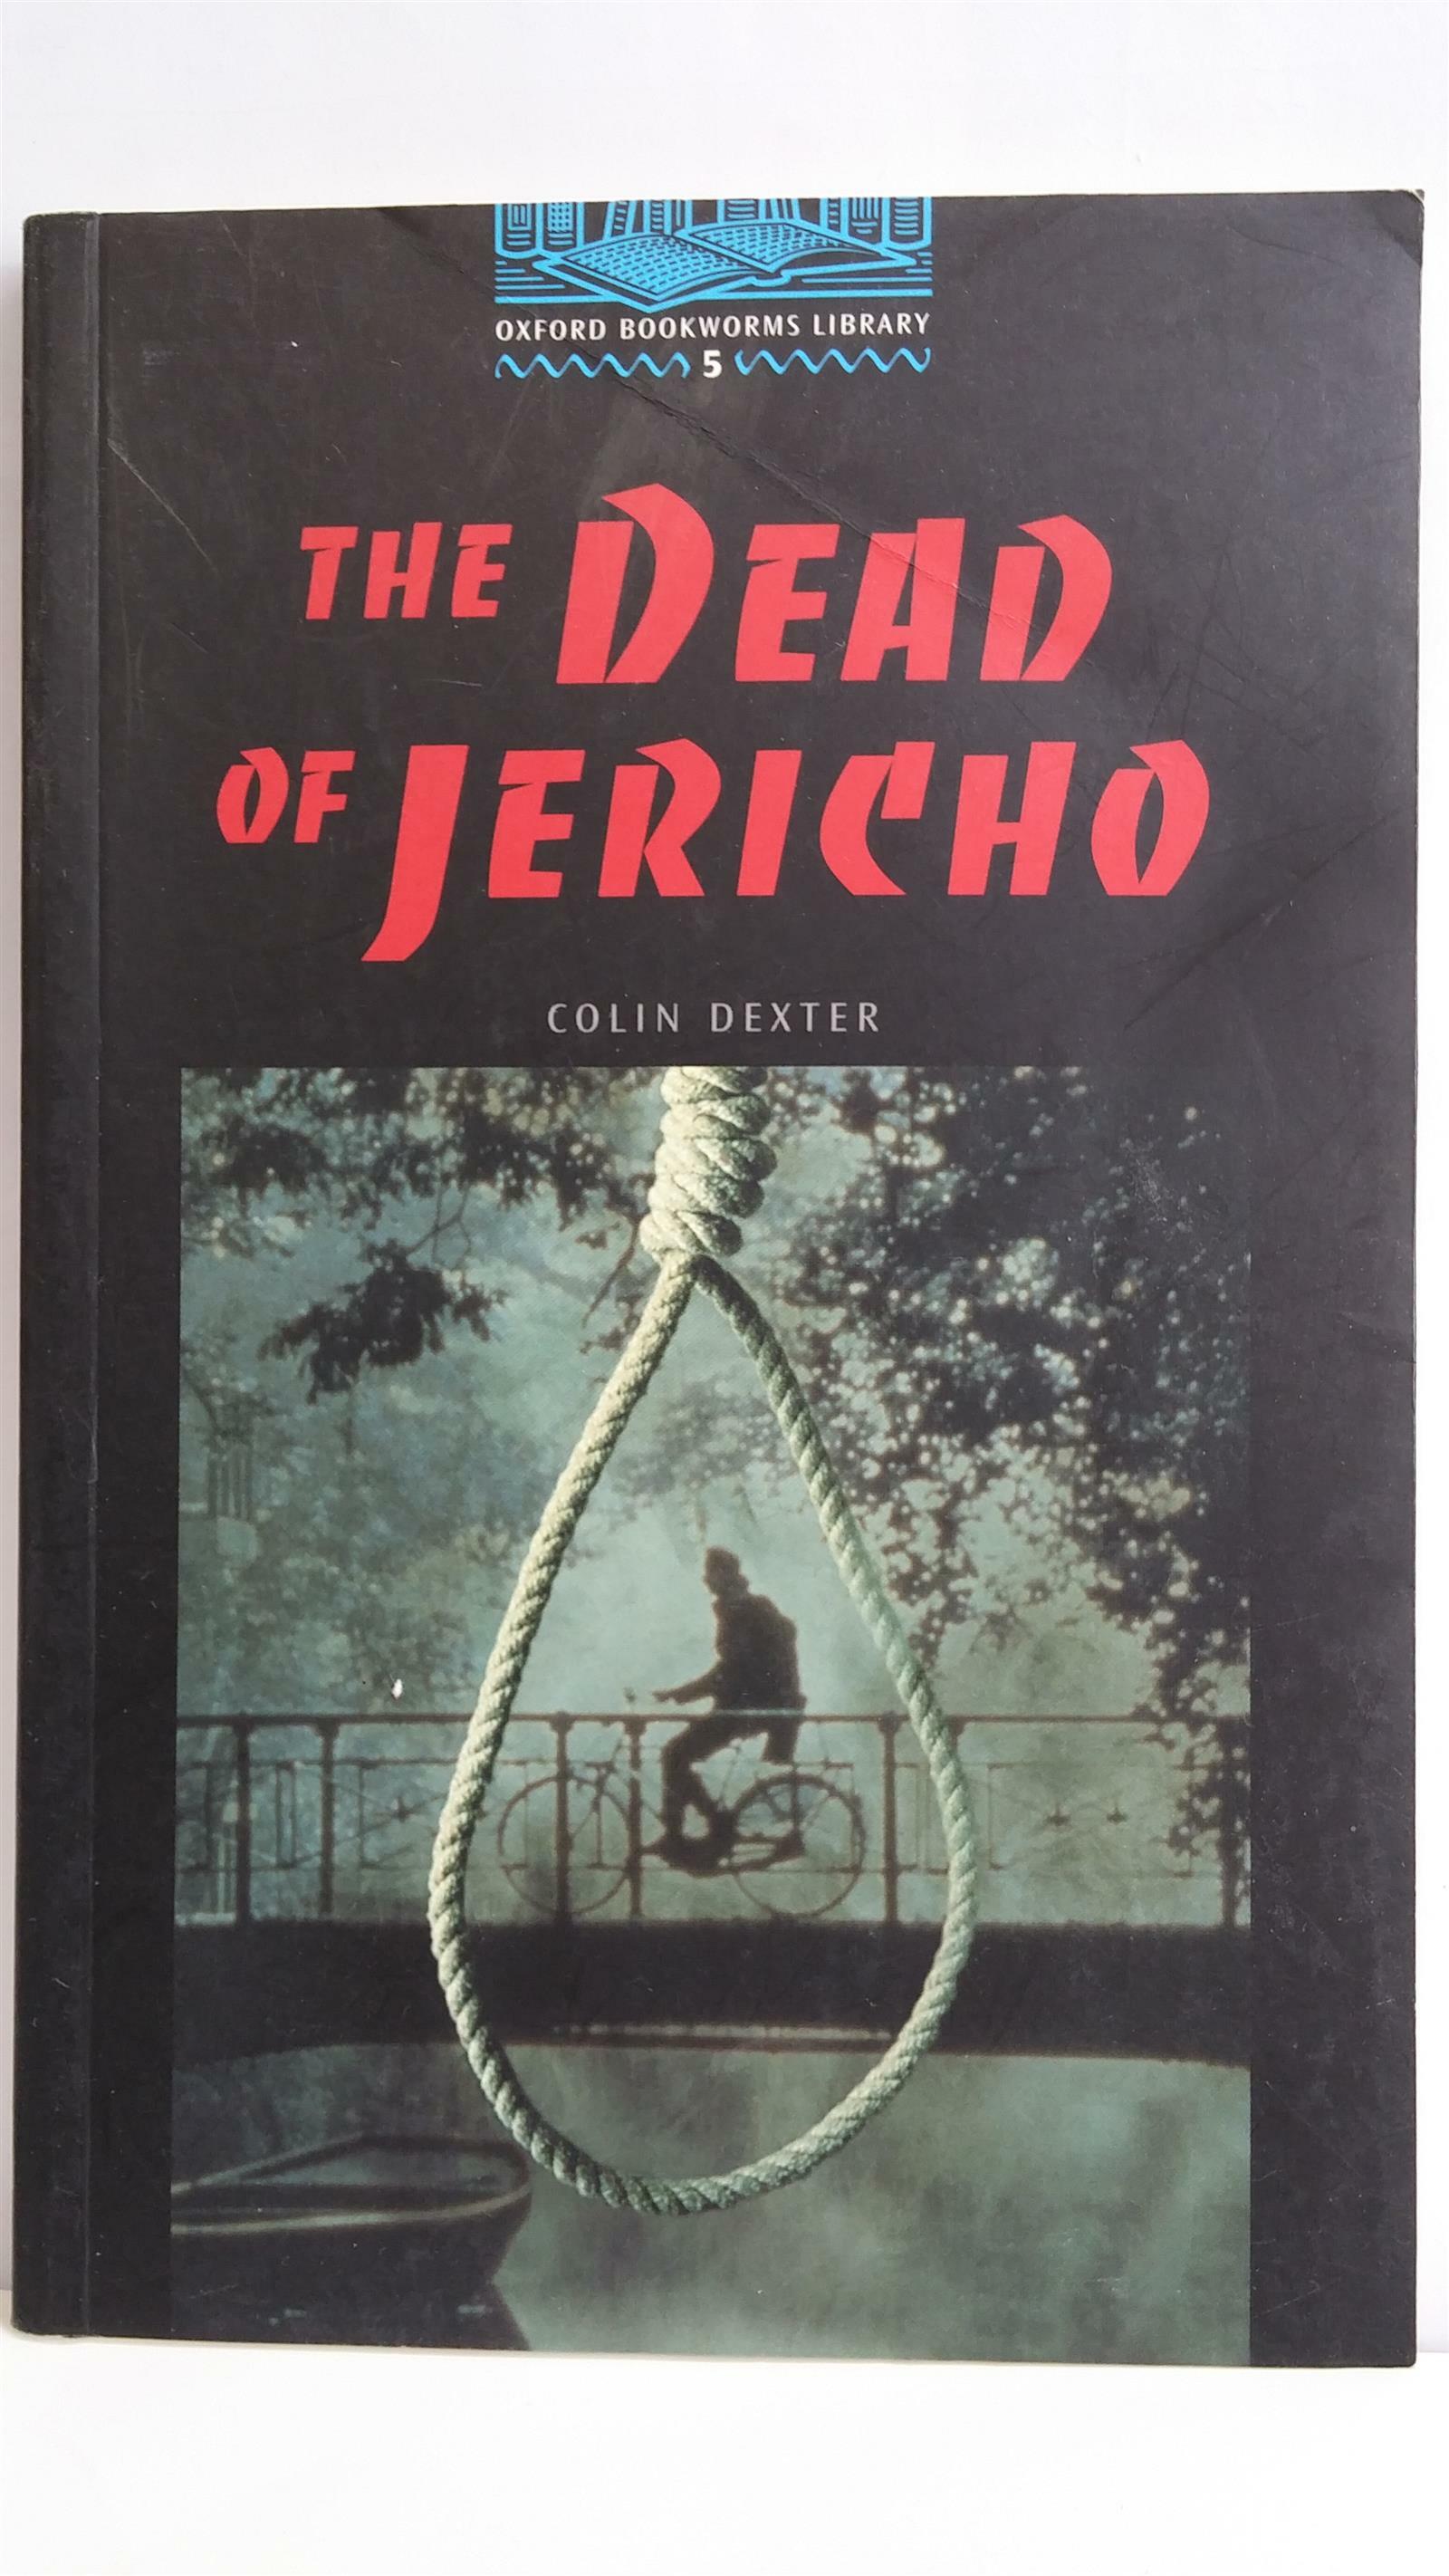 THE DEAD OF JERICHO